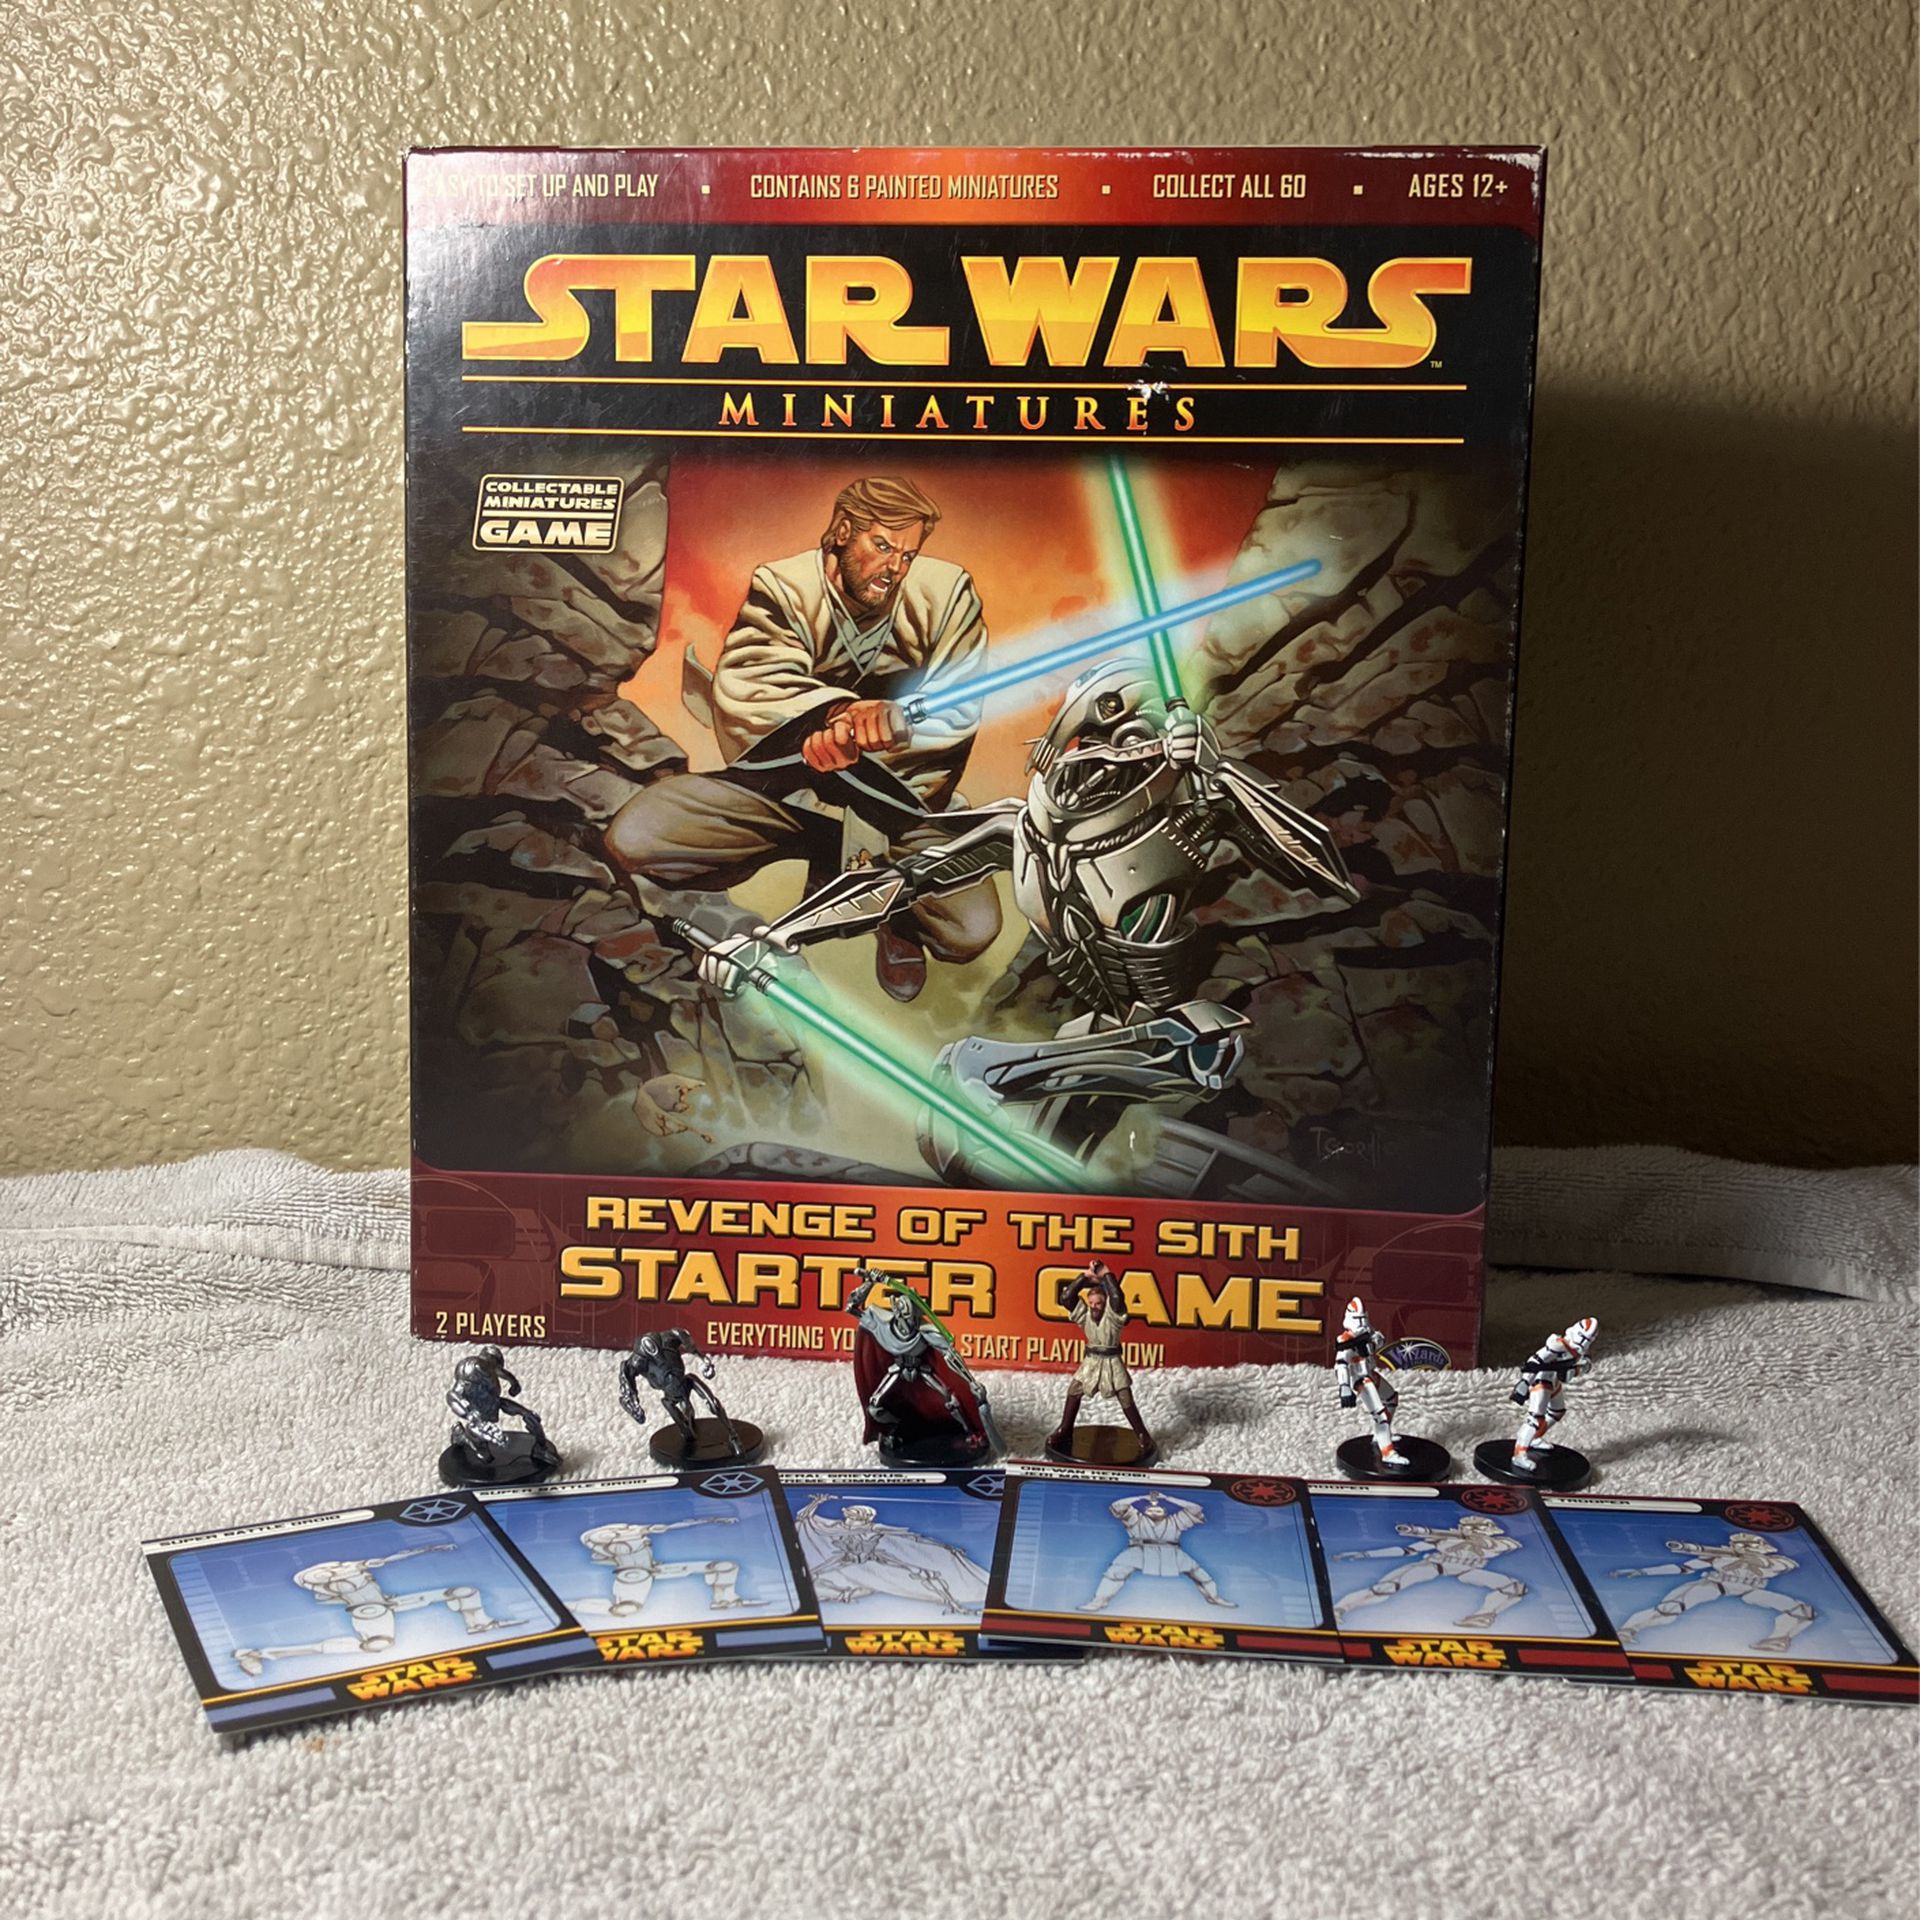 Star Wars Miniatures Revenge Of The Sith Board Game